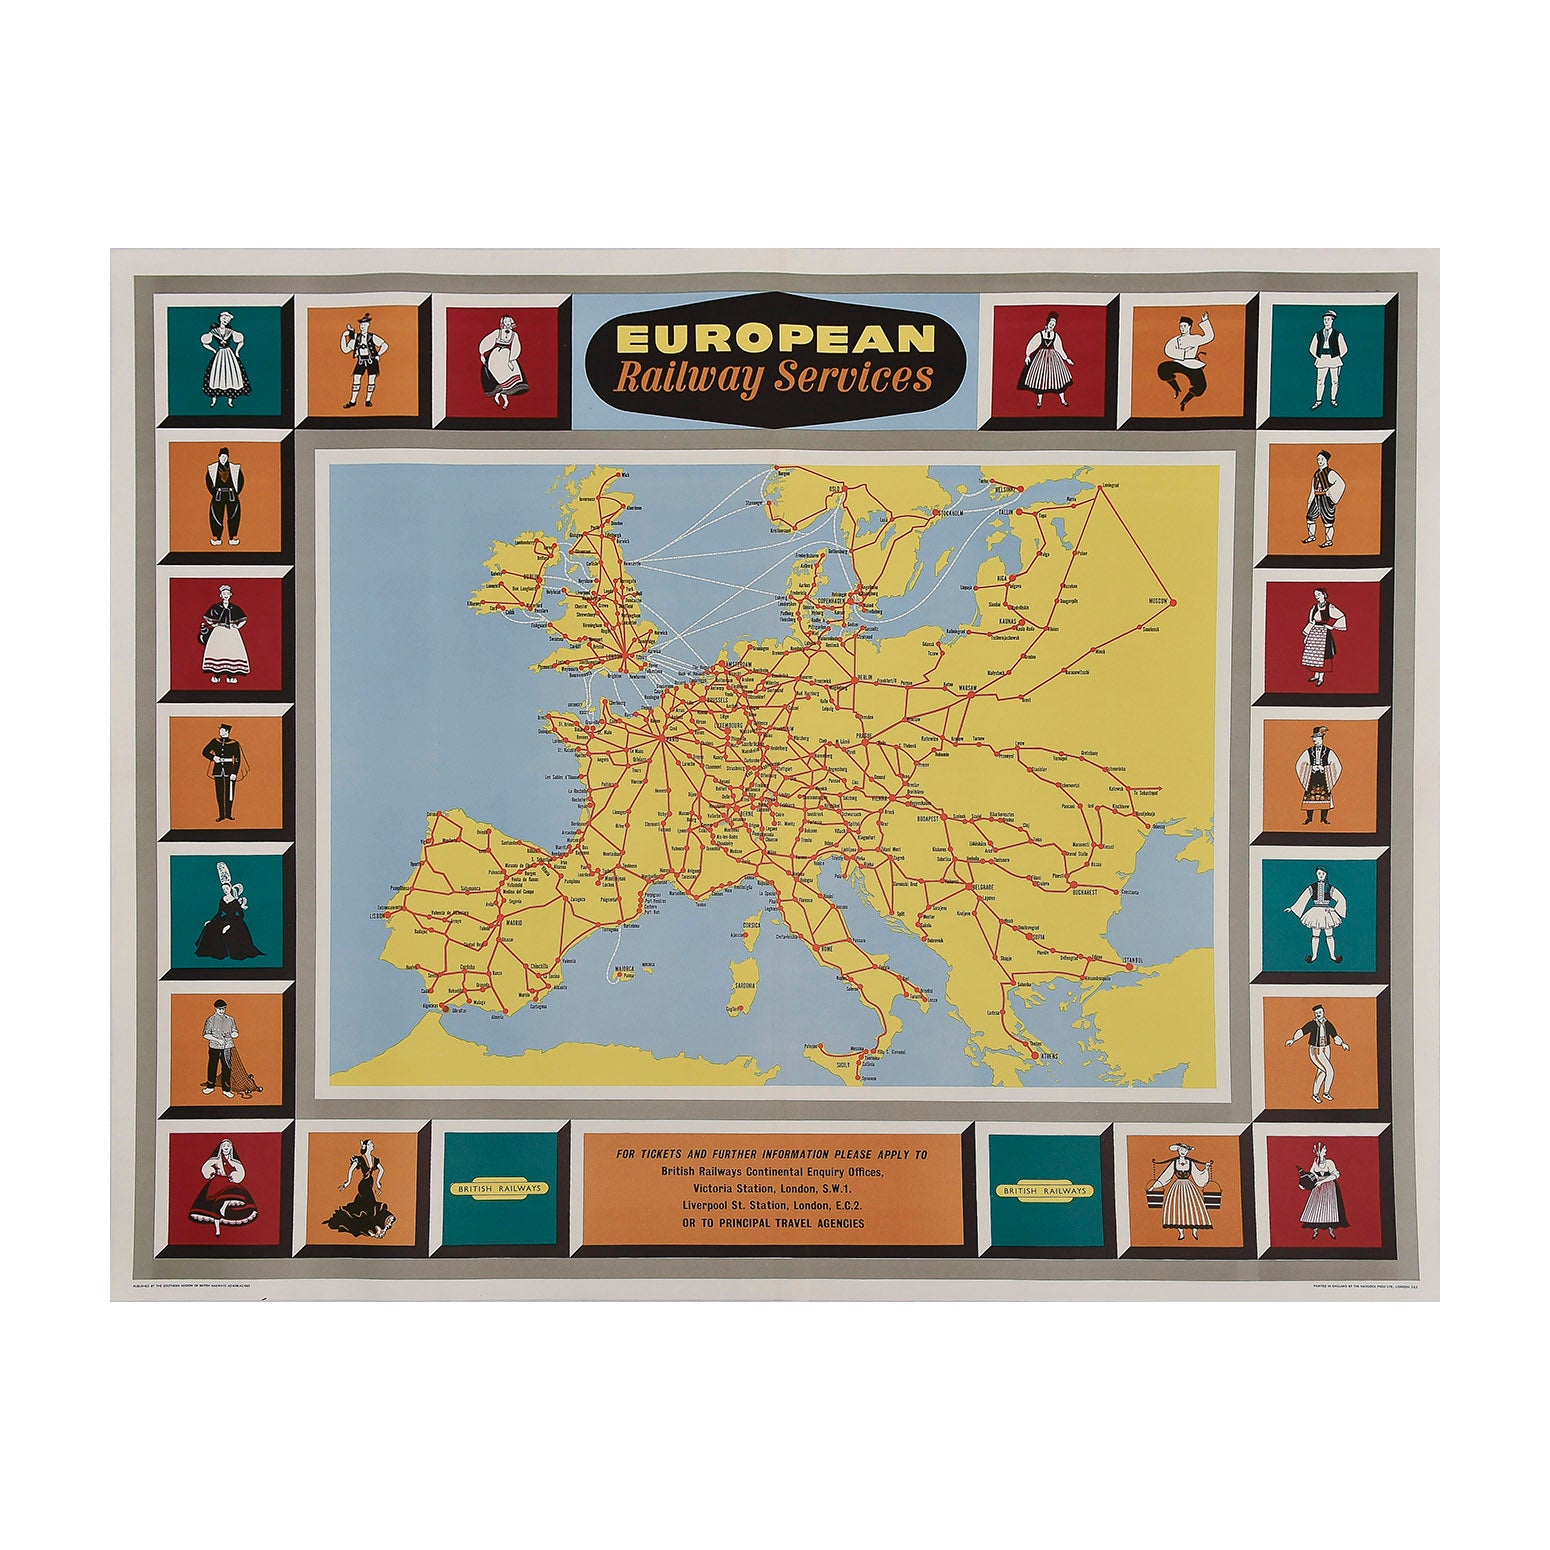 British Railways (Southern Region) station poster map promoting ‘European Railway Services’, 1963. The poster shows the mainline European rail contained within a decorative border depicting characters in national dress representing twenty countries and regions